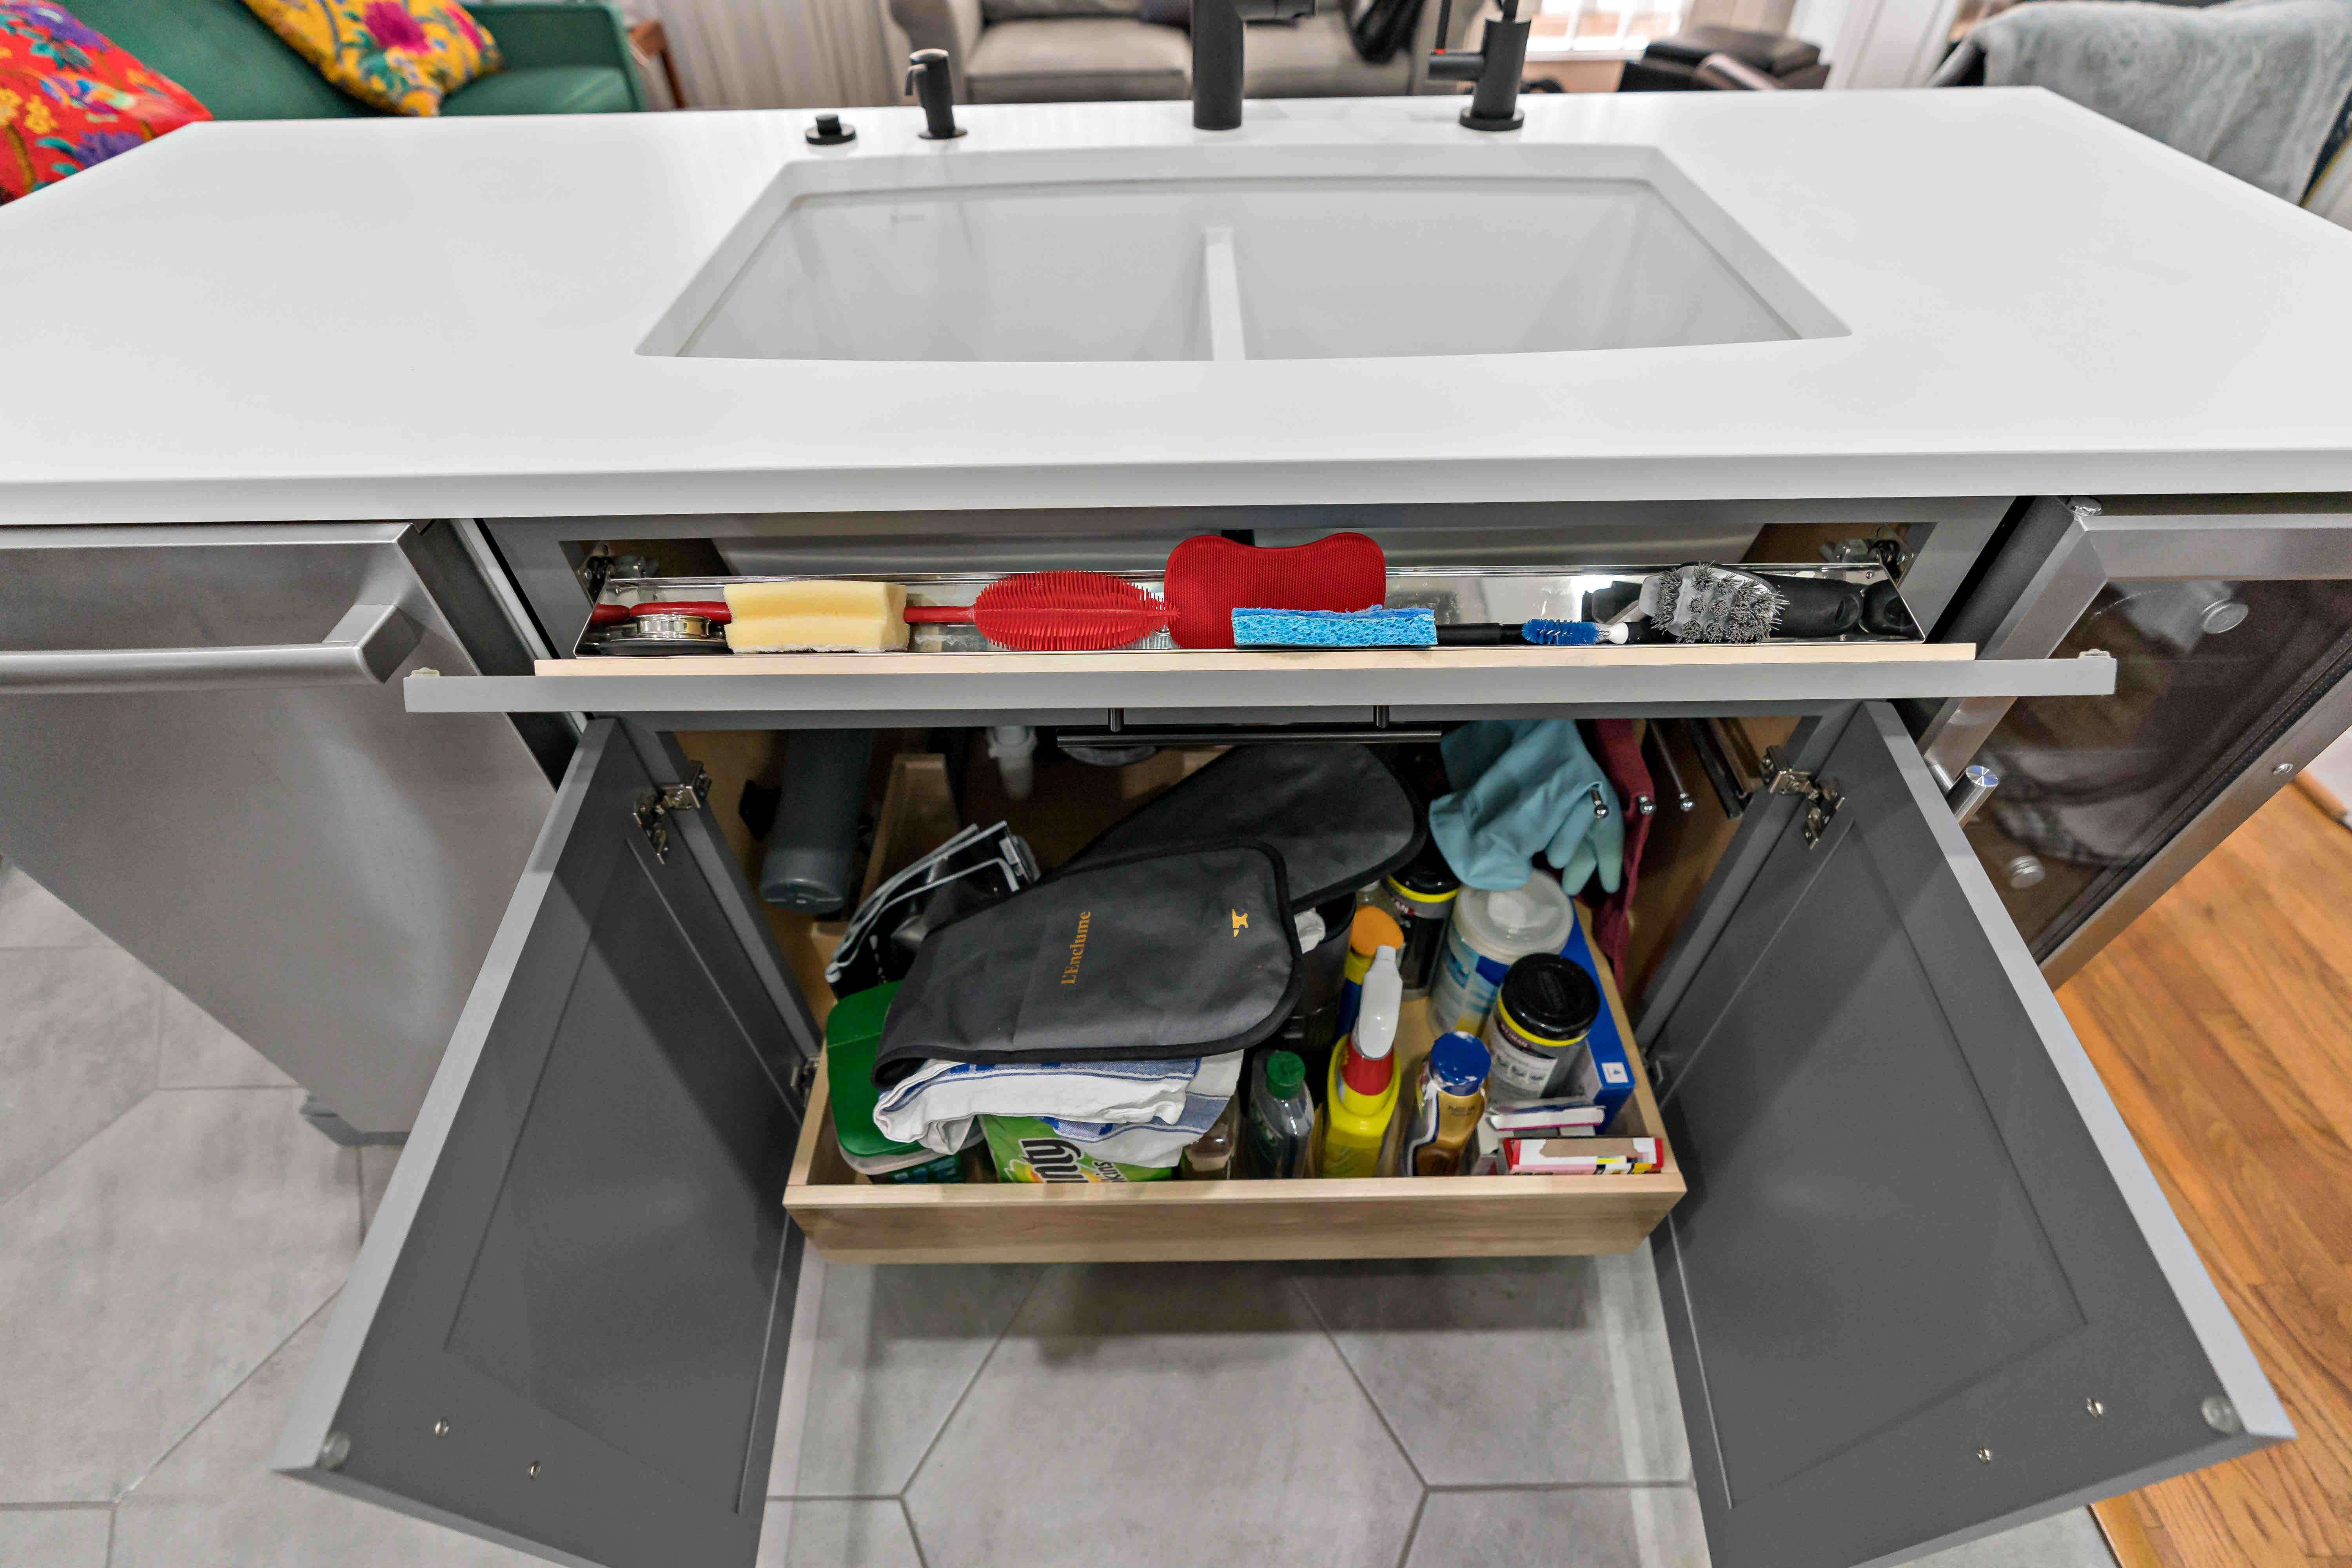 Under the kitchen sink organization and pull-out drawer